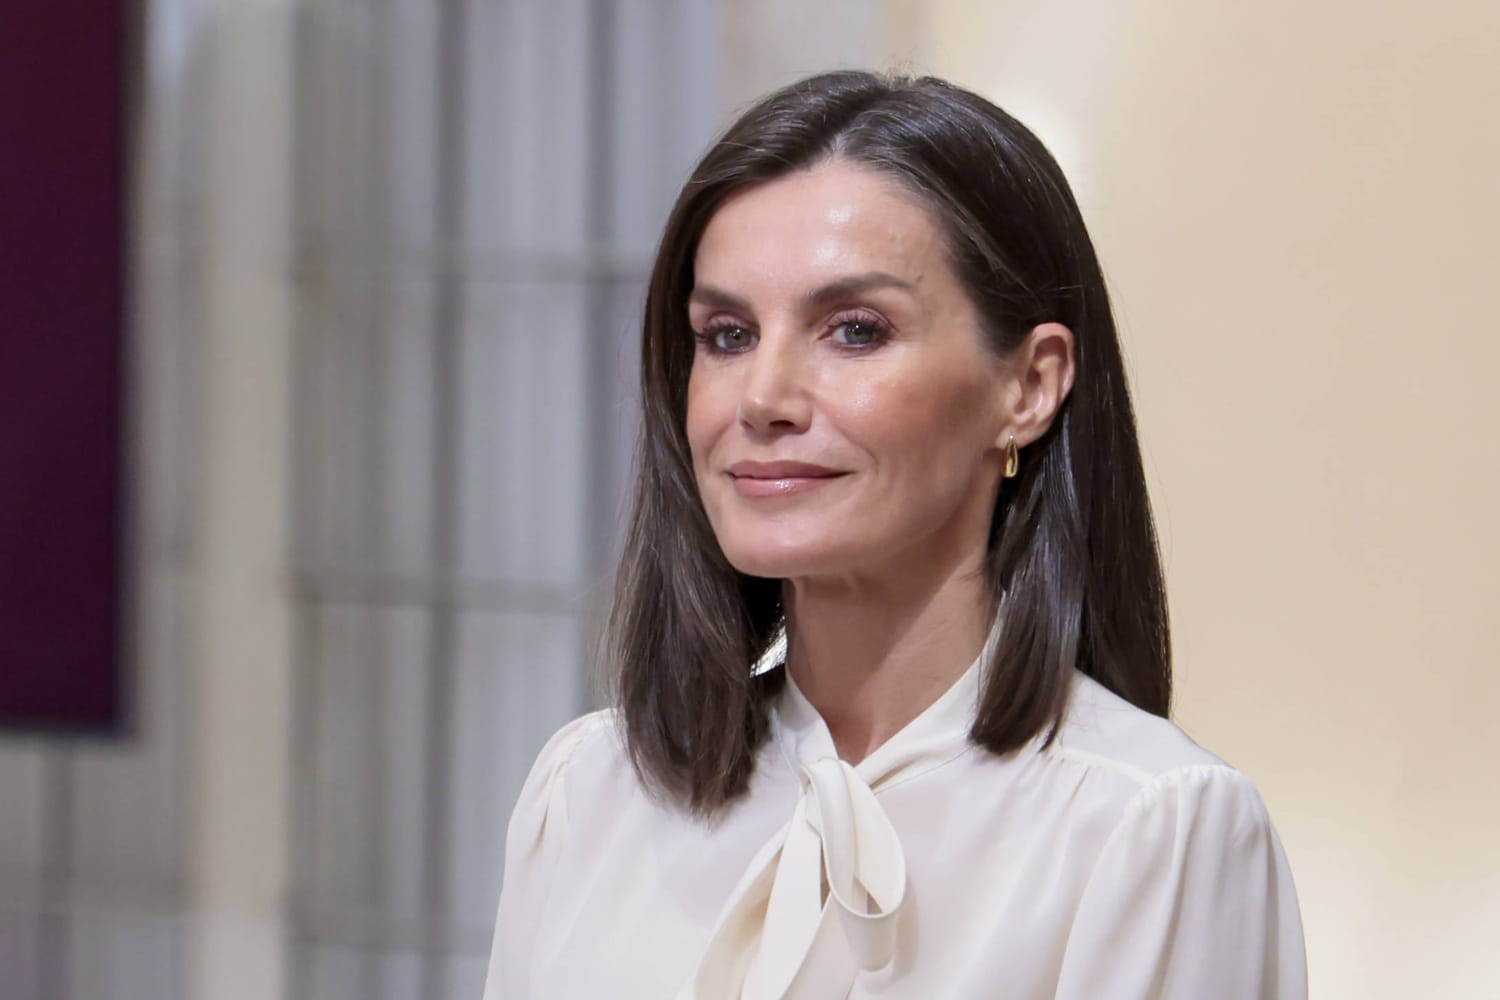 In her particularly glamorous outfit, Letizia from Spain looks 15 years younger